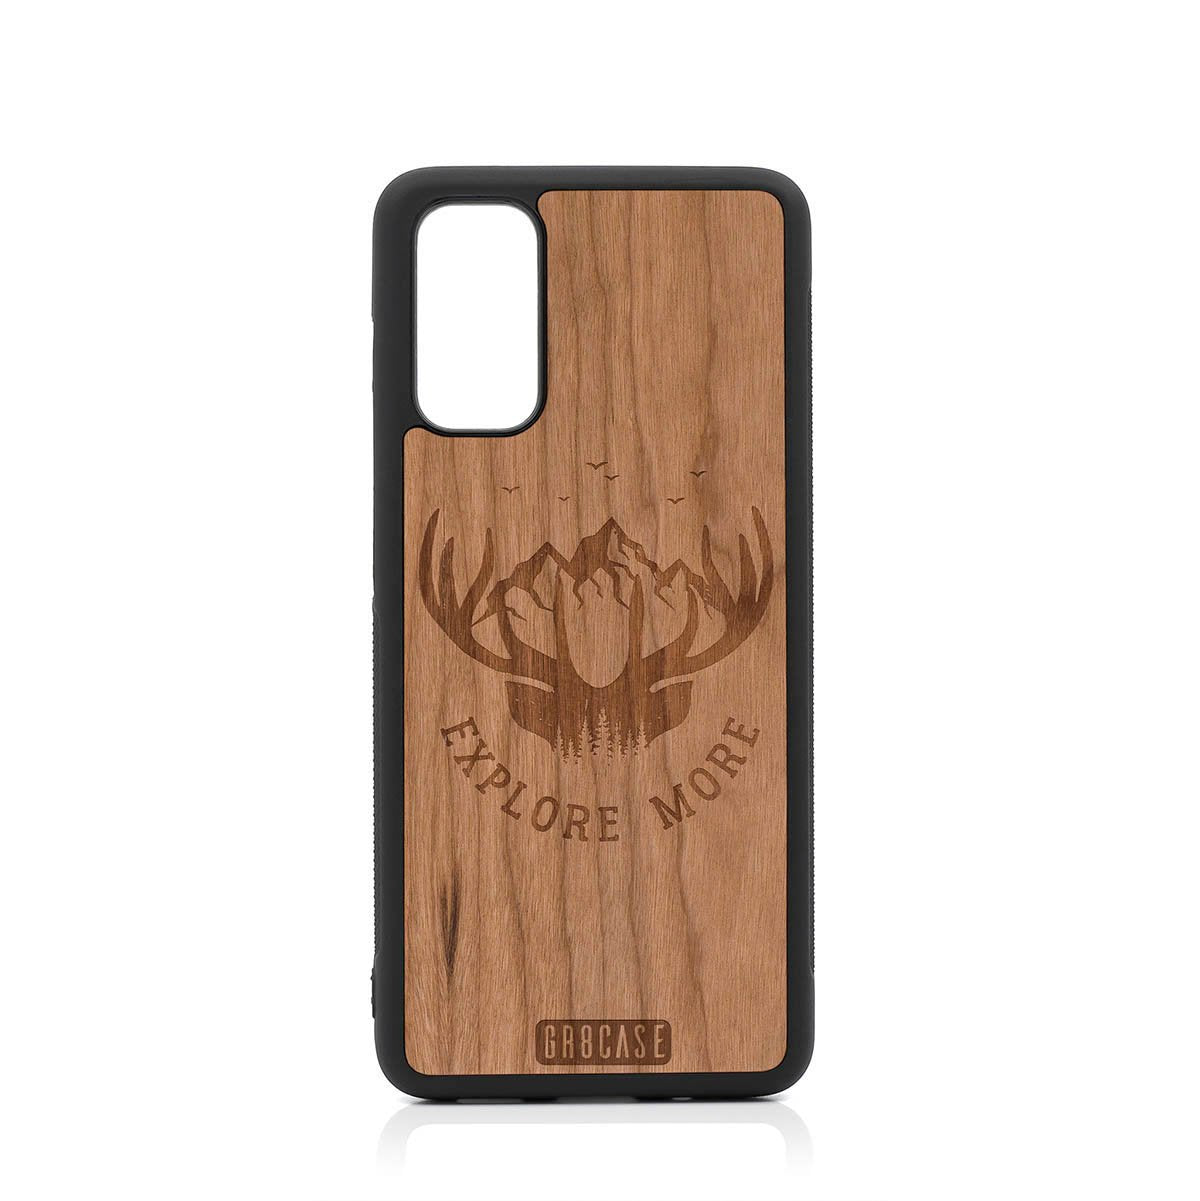 Explore More (Forest, Mountains & Antlers) Design Wood Case For Samsung Galaxy S20 FE 5G by GR8CASE